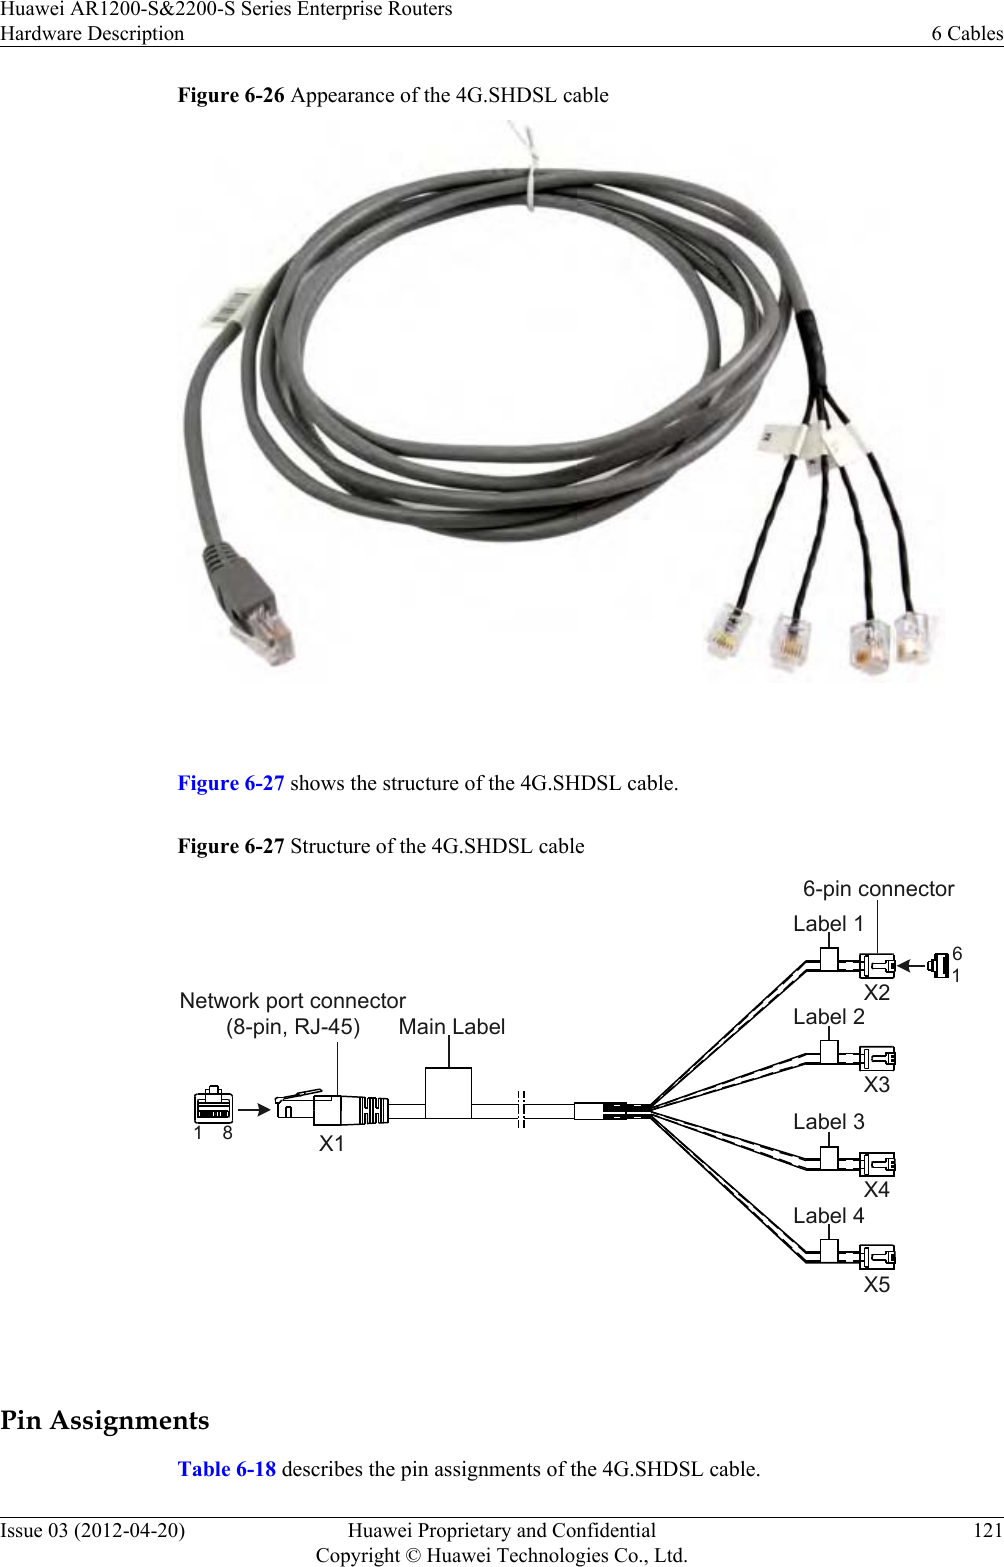 Figure 6-26 Appearance of the 4G.SHDSL cable Figure 6-27 shows the structure of the 4G.SHDSL cable.Figure 6-27 Structure of the 4G.SHDSL cableX11 8Main LabelX2X3X4X516Network port connector(8-pin, RJ-45)Label 1Label 2Label 3Label 46-pin connector Pin AssignmentsTable 6-18 describes the pin assignments of the 4G.SHDSL cable.Huawei AR1200-S&amp;2200-S Series Enterprise RoutersHardware Description 6 CablesIssue 03 (2012-04-20) Huawei Proprietary and ConfidentialCopyright © Huawei Technologies Co., Ltd.121